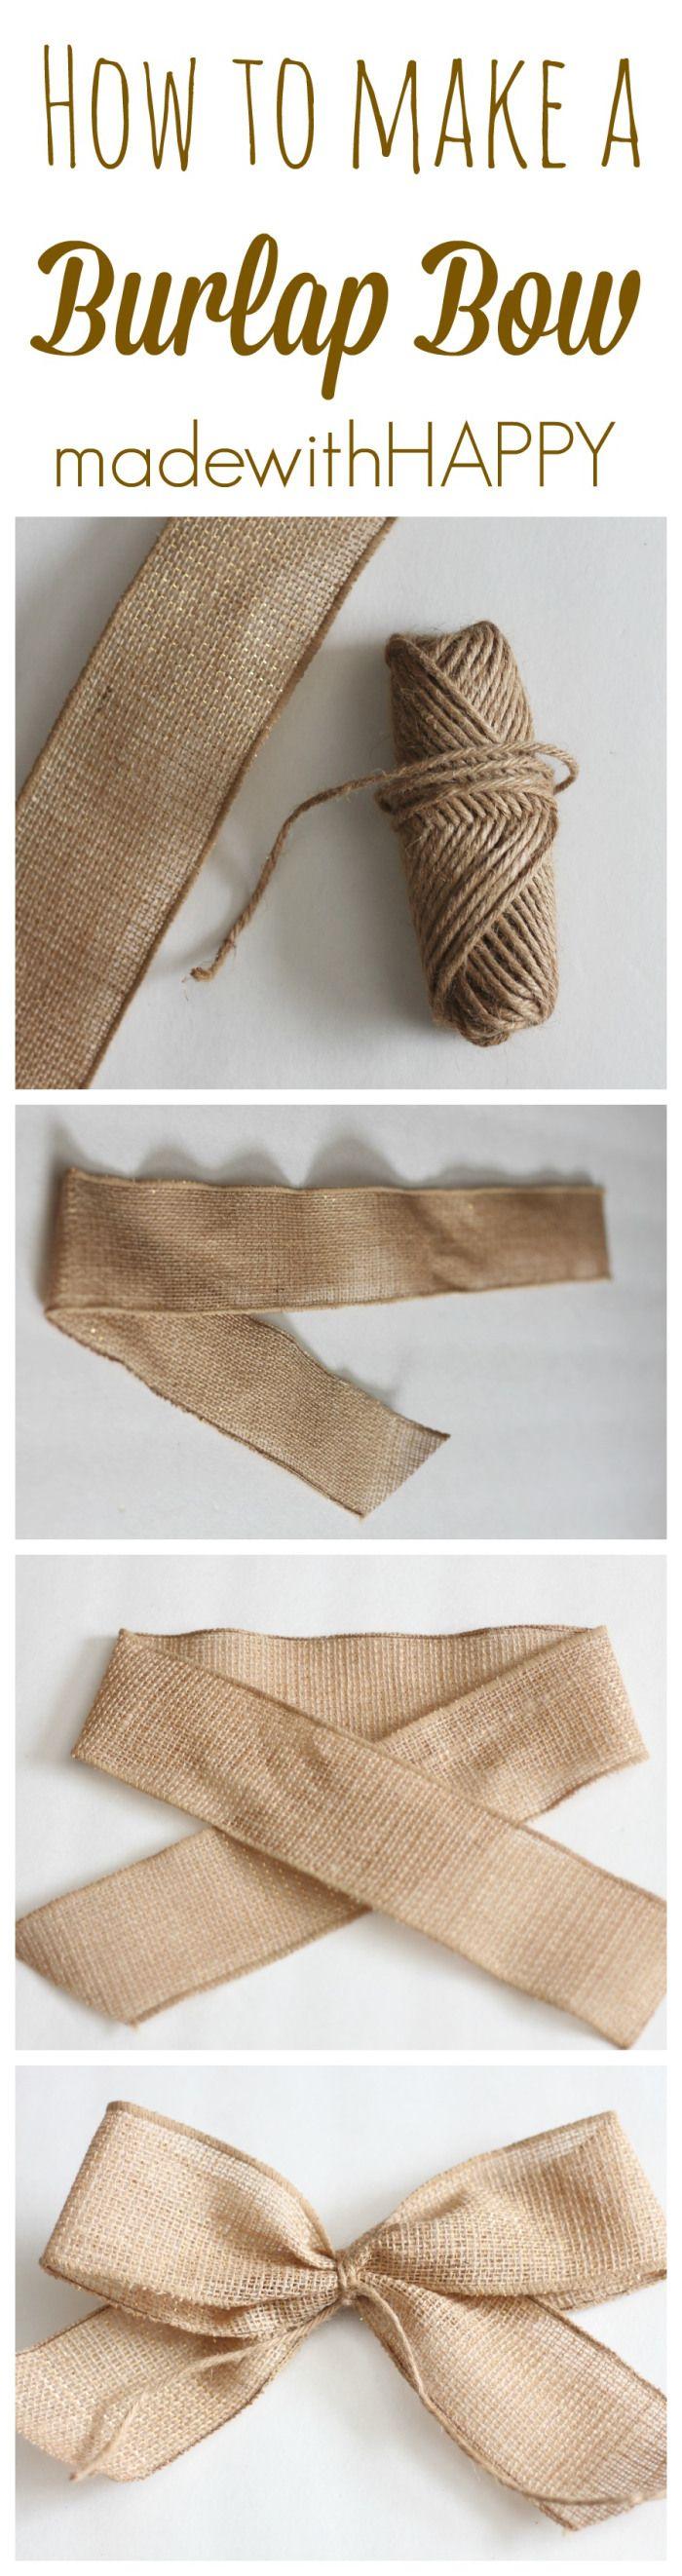 Wedding - How To Make A Burlap Bow